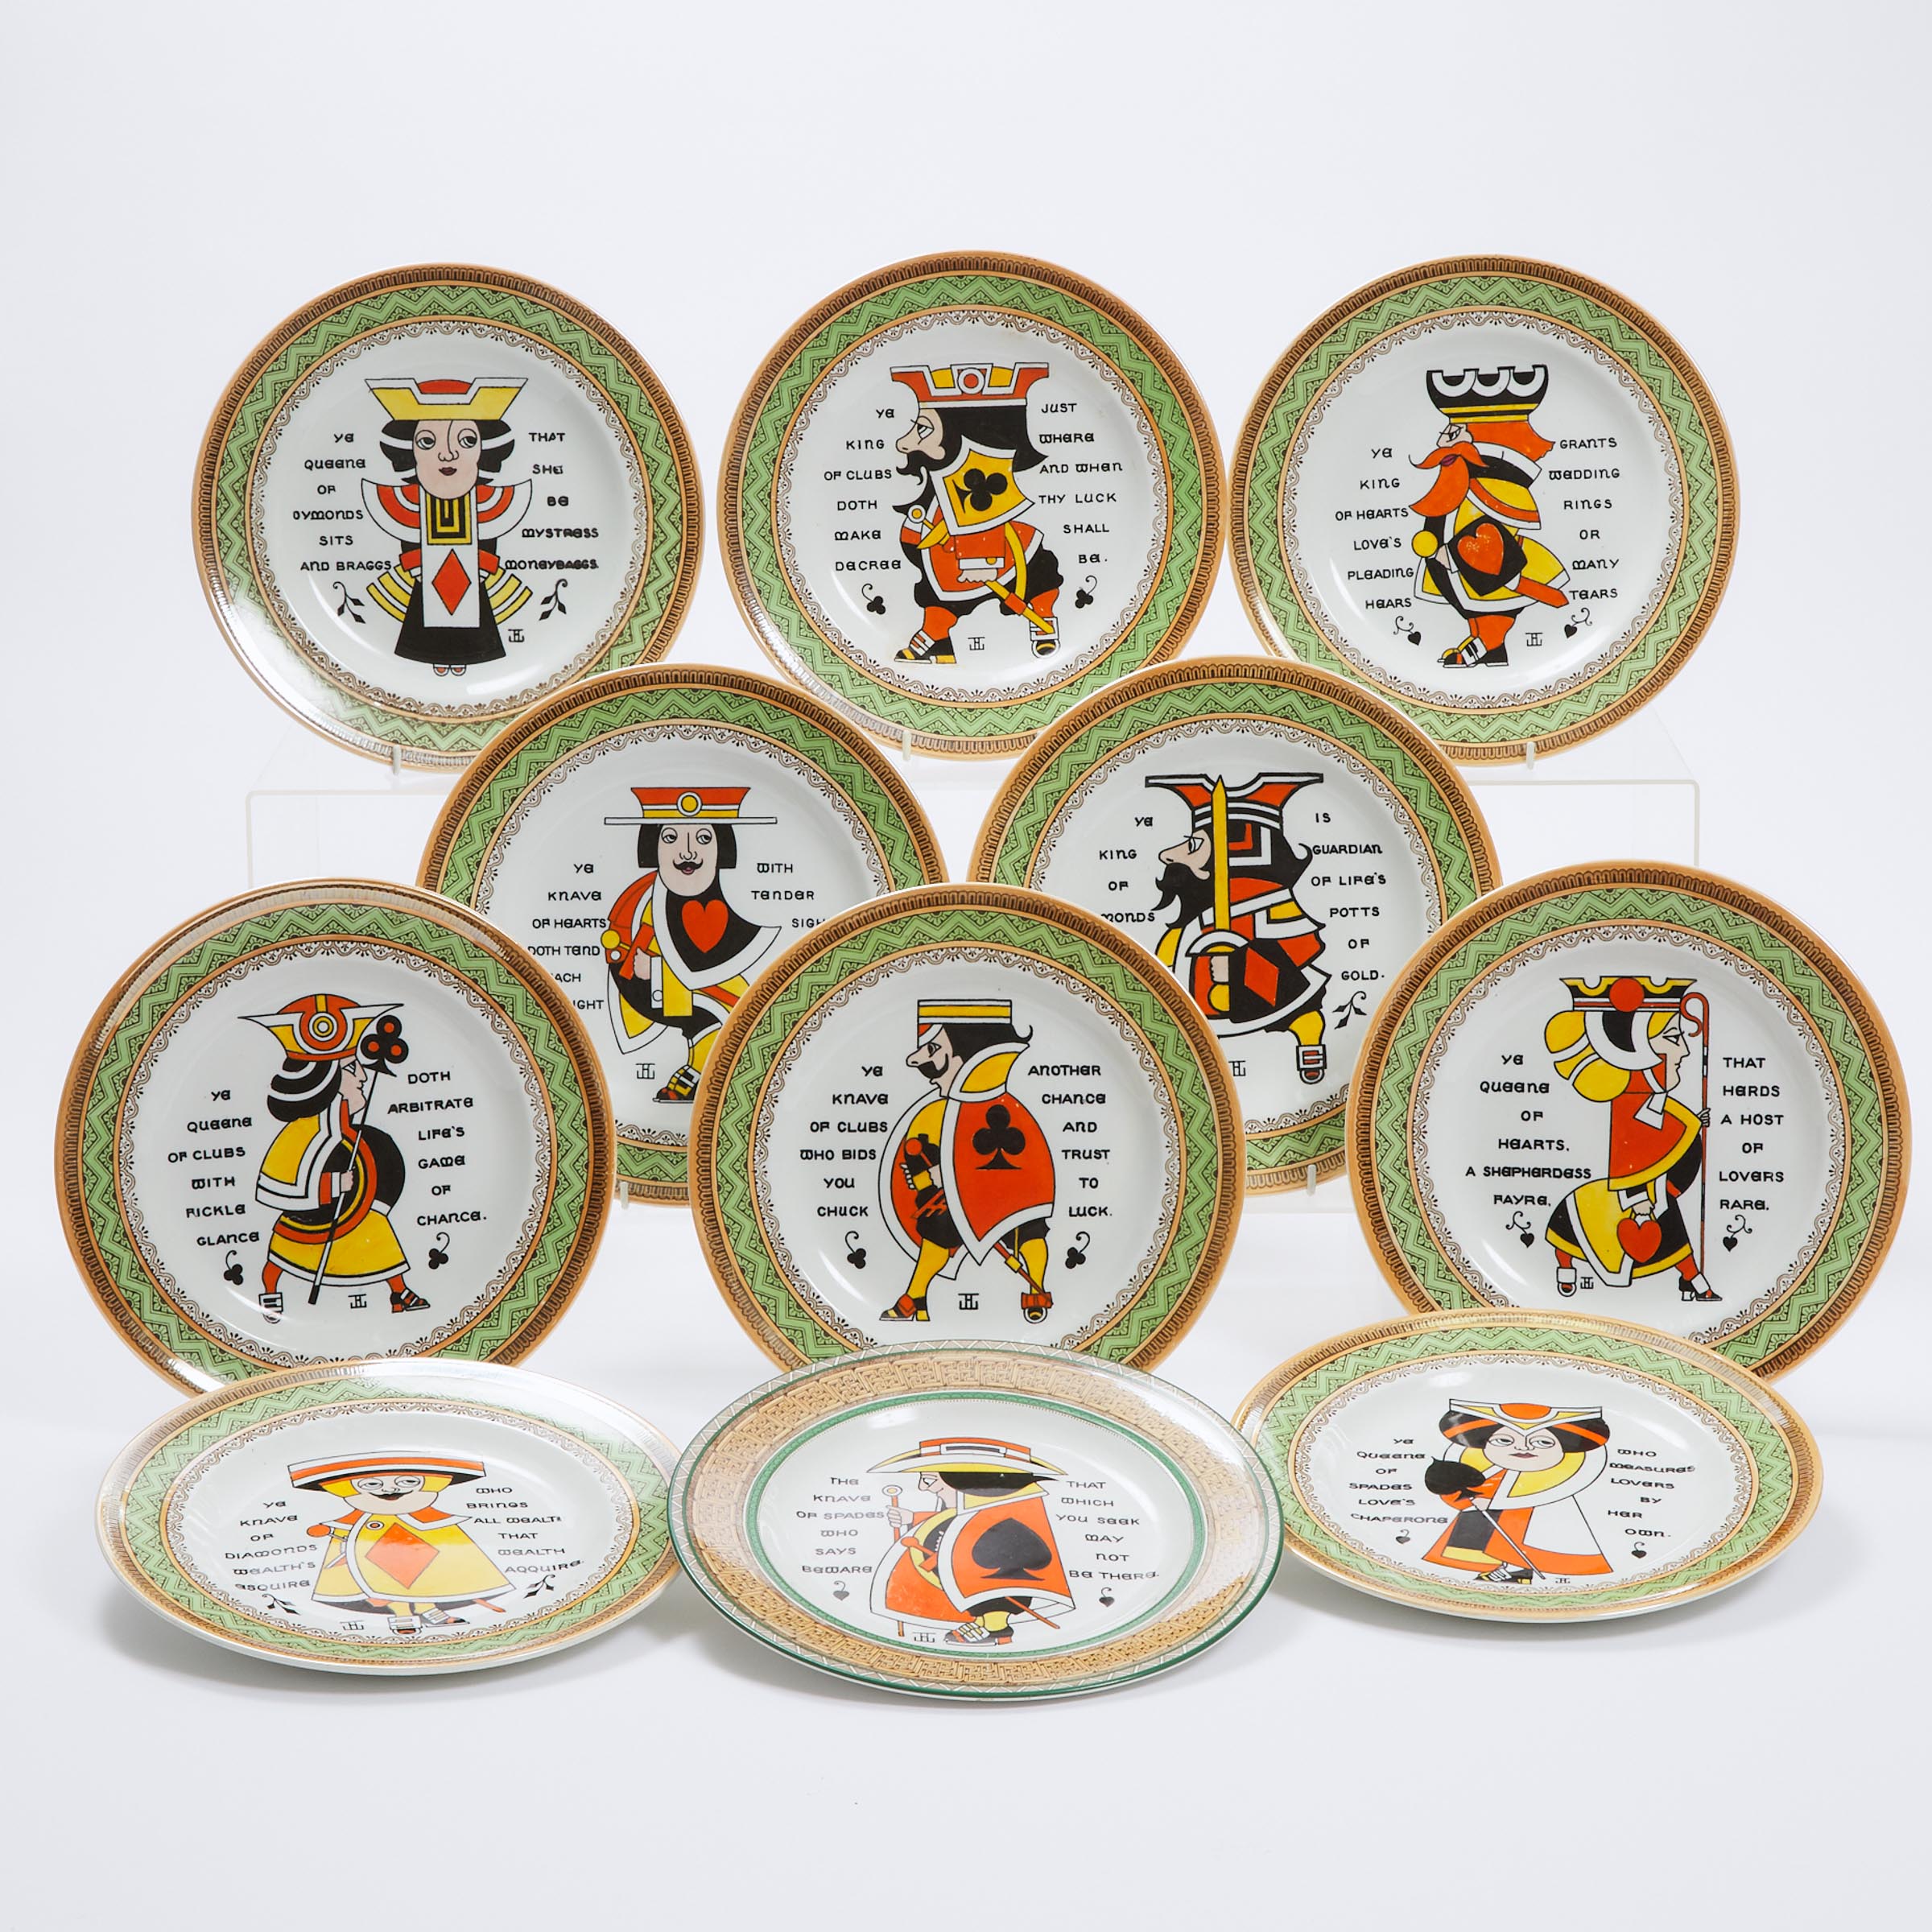 Eleven Wedgwood Playing Card Plates, Augustus Jansson, c.1910